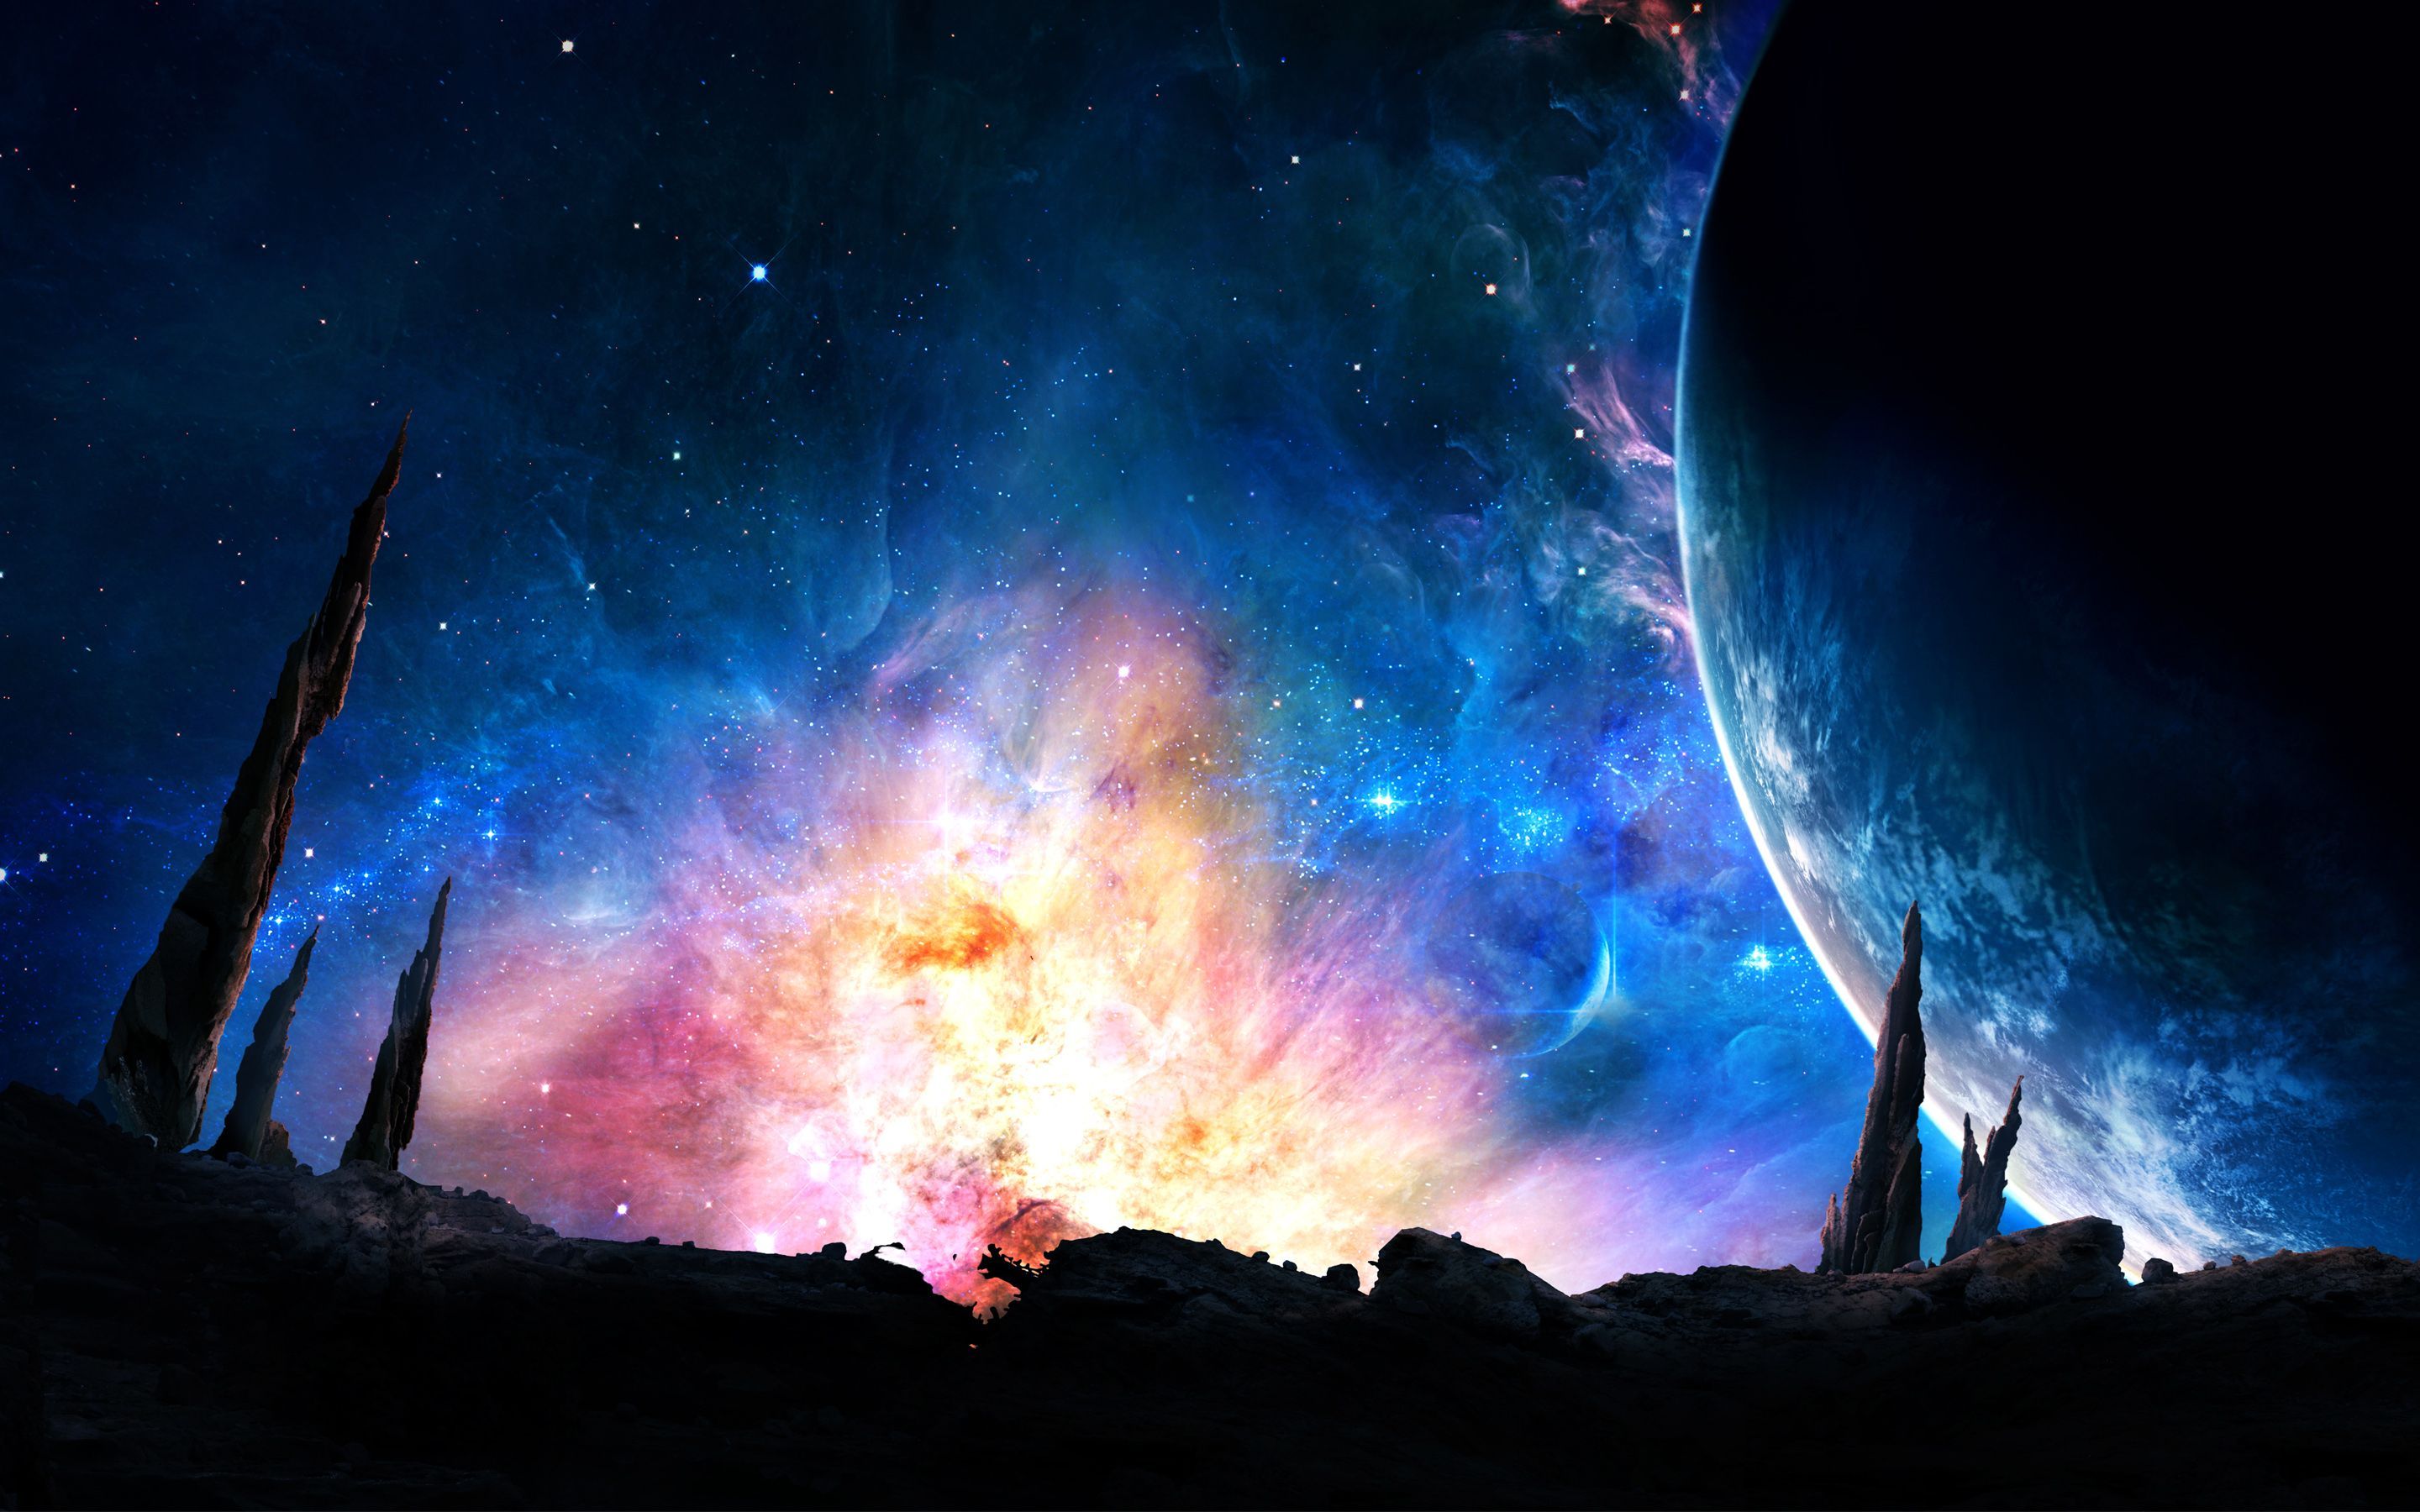 Hd Wallpapers Galaxy Group 83